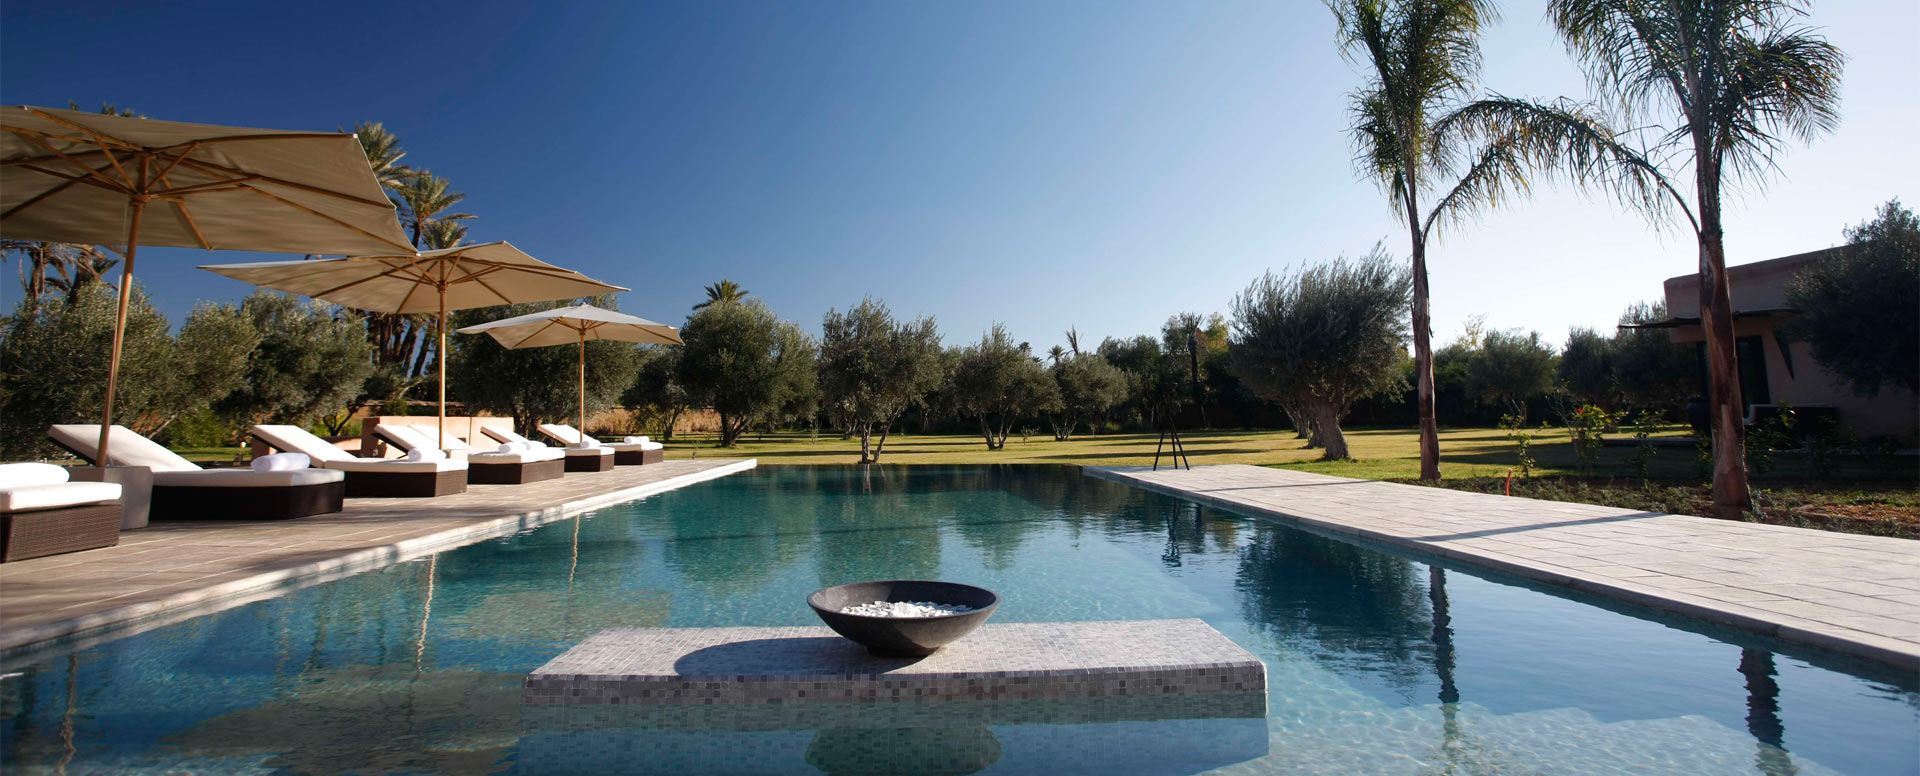 Renting_a_villa_with_a_heated_pool